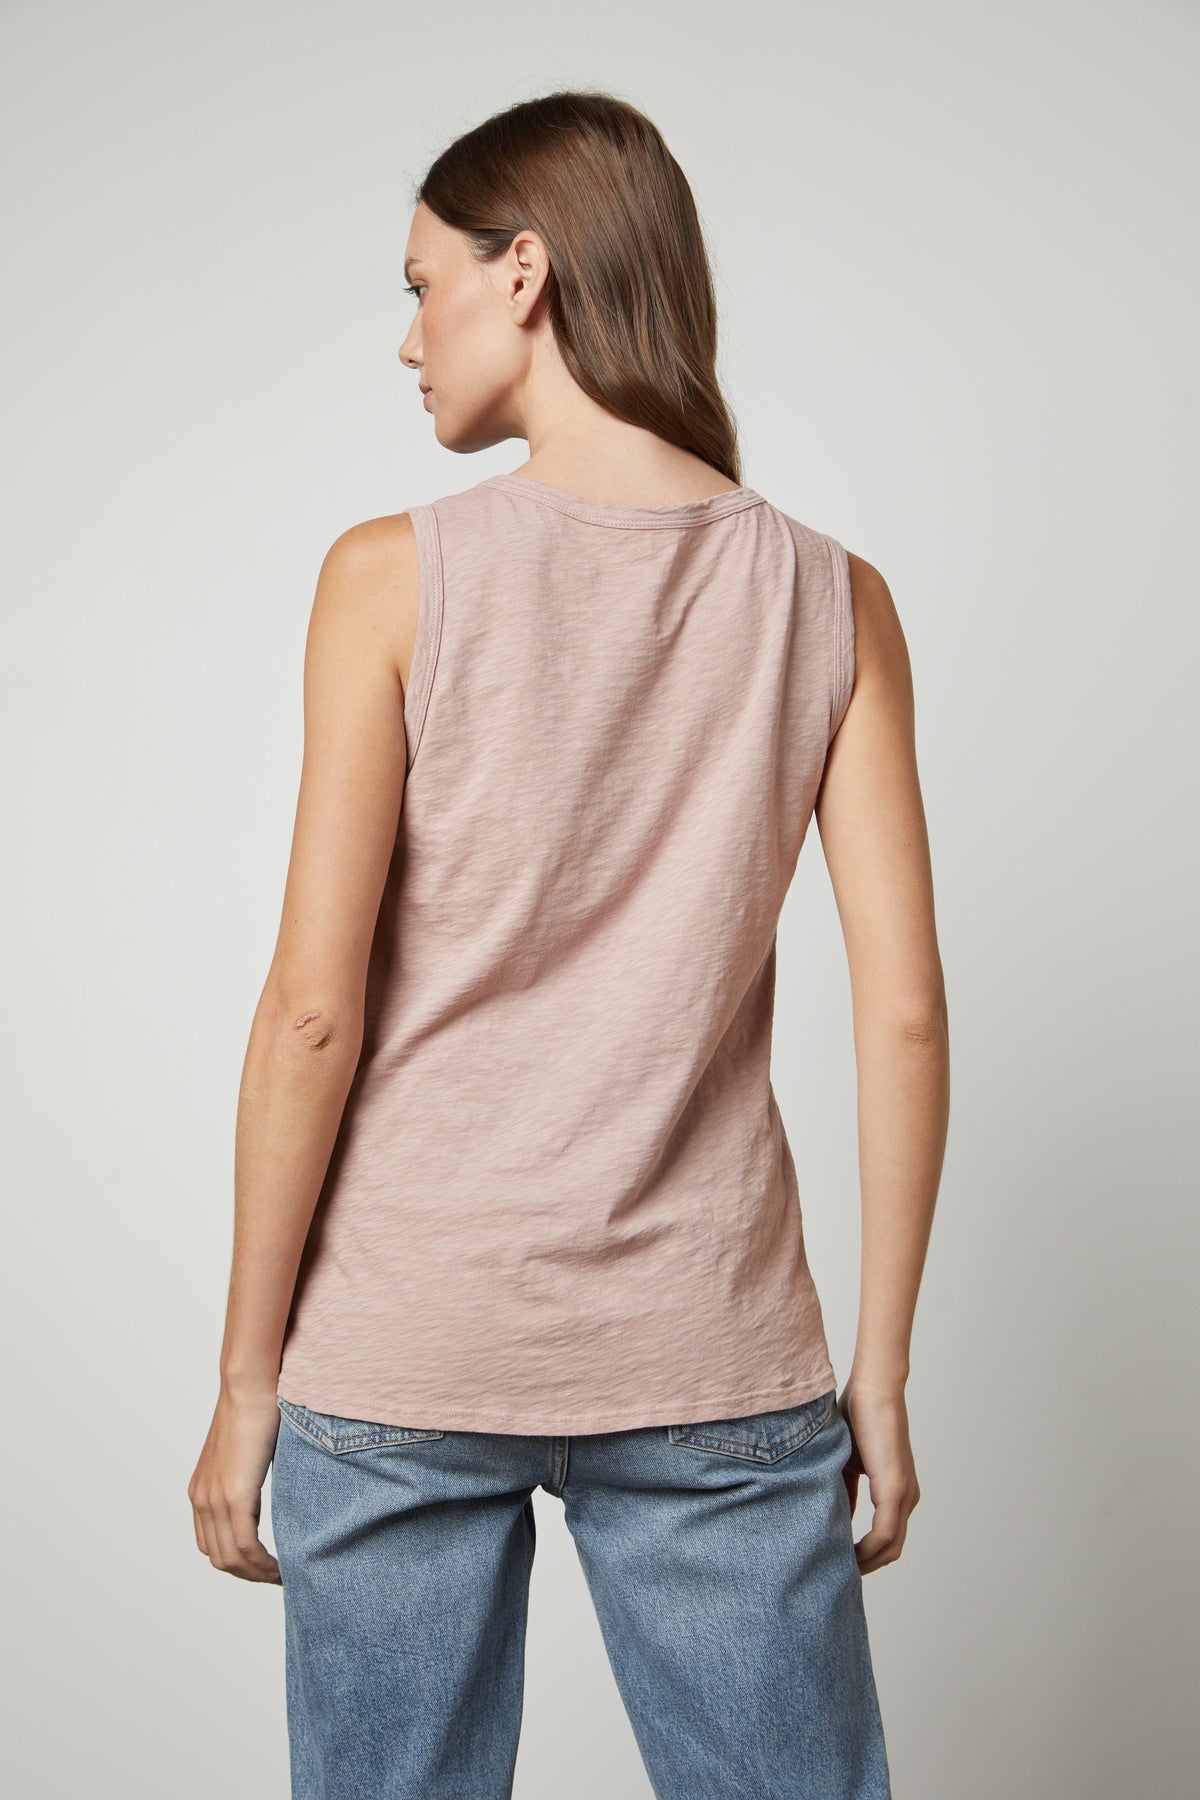 The back view of a woman wearing a TAURUS COTTON SLUB TANK by Velvet by Graham & Spencer.-35567717613761